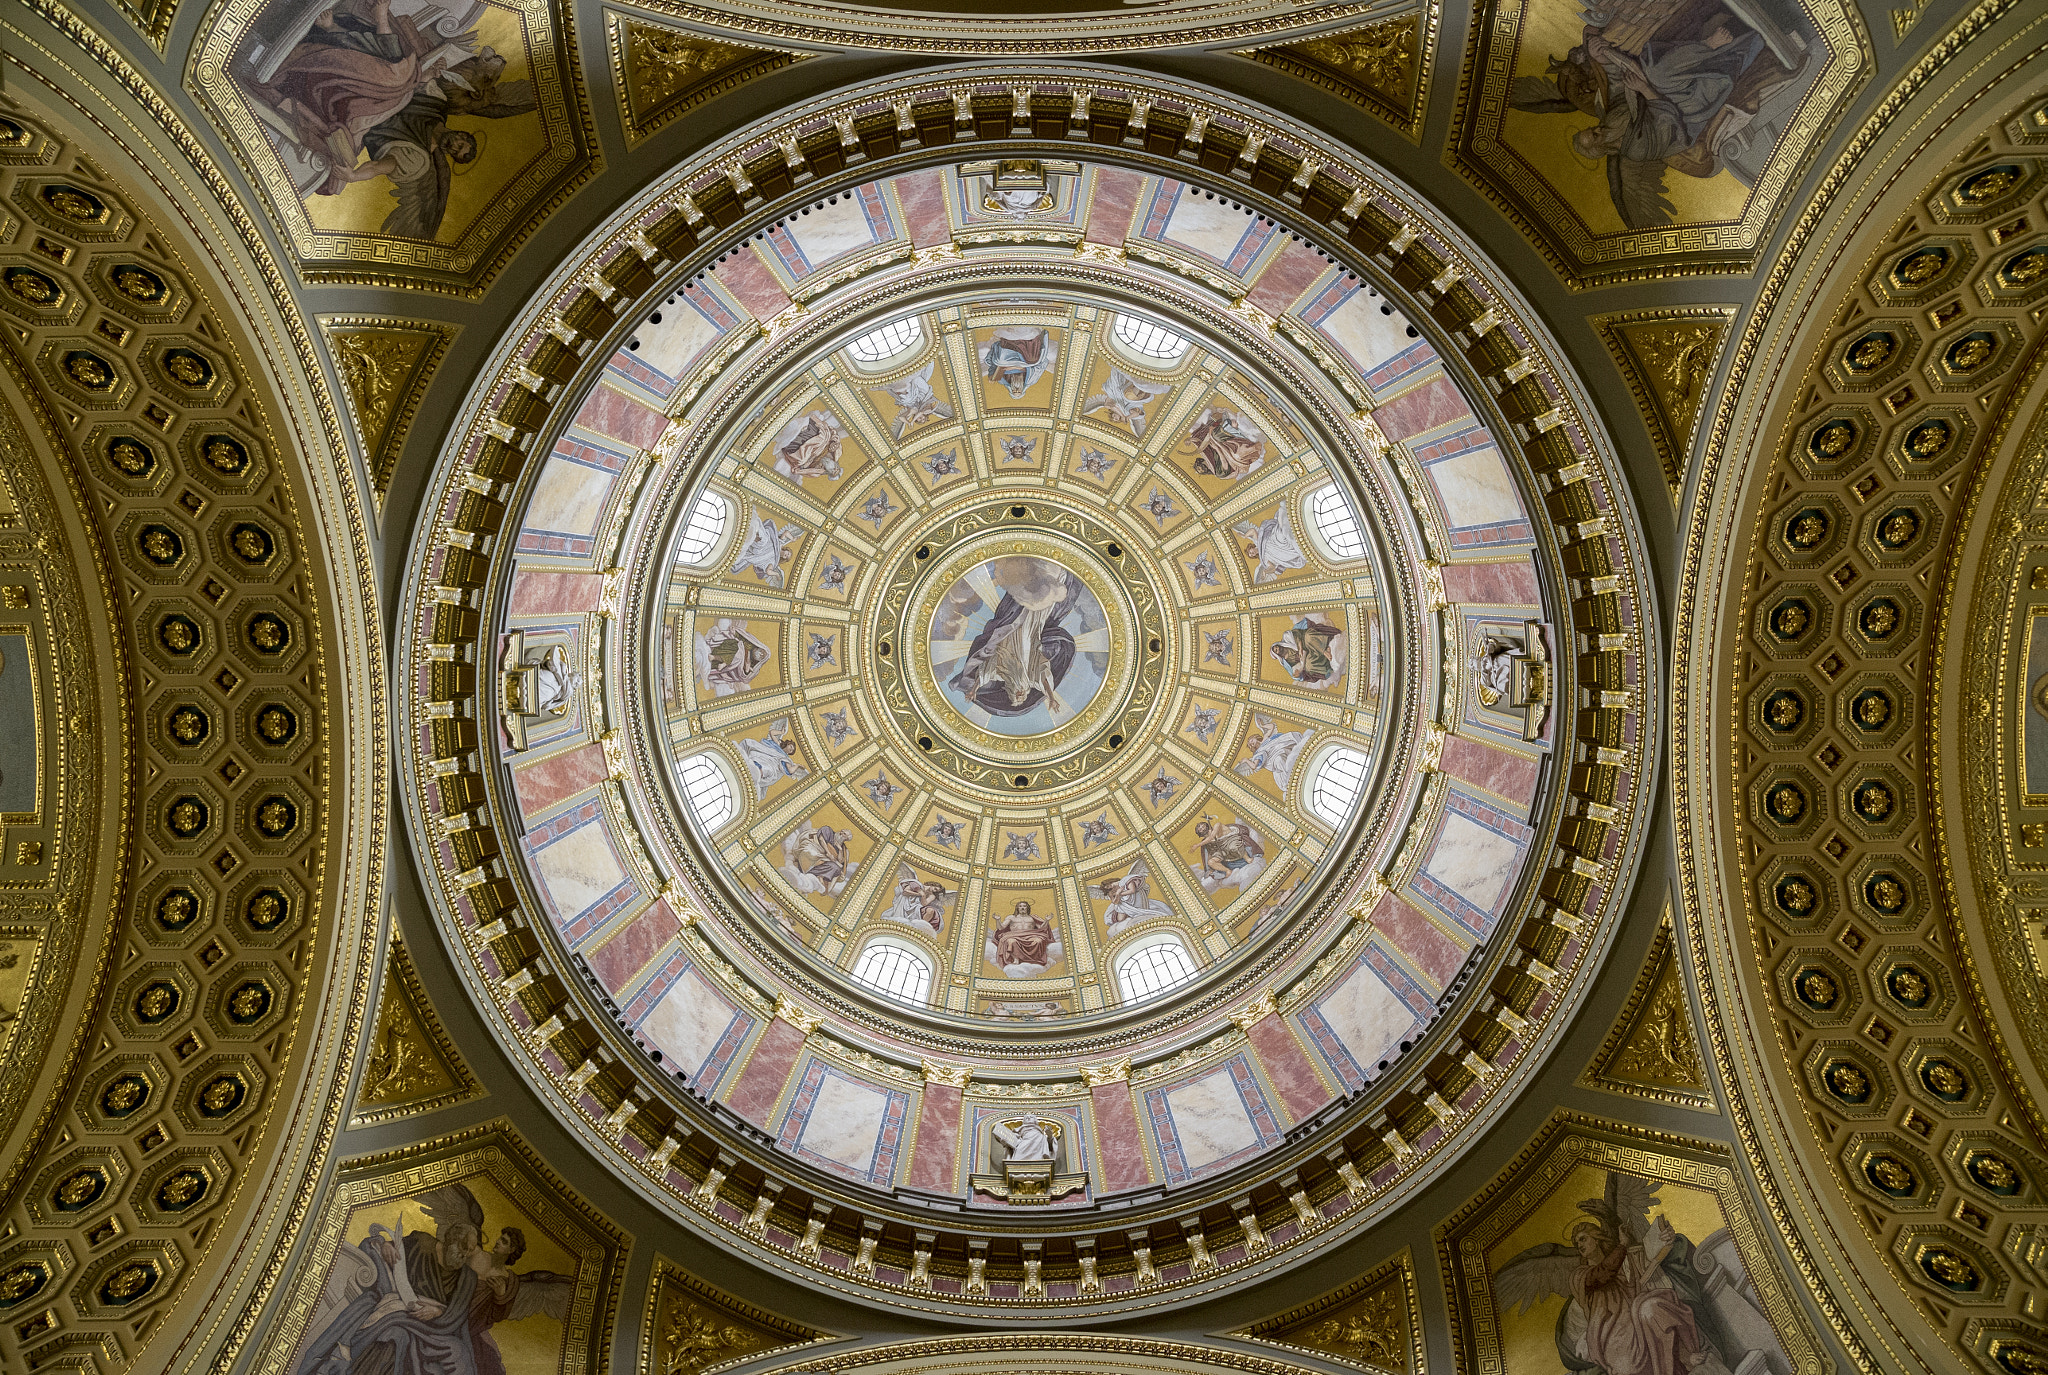 Canon EOS-1D X + Sigma 24-105mm f/4 DG OS HSM | A sample photo. Dome in st. stephen's basilica photography